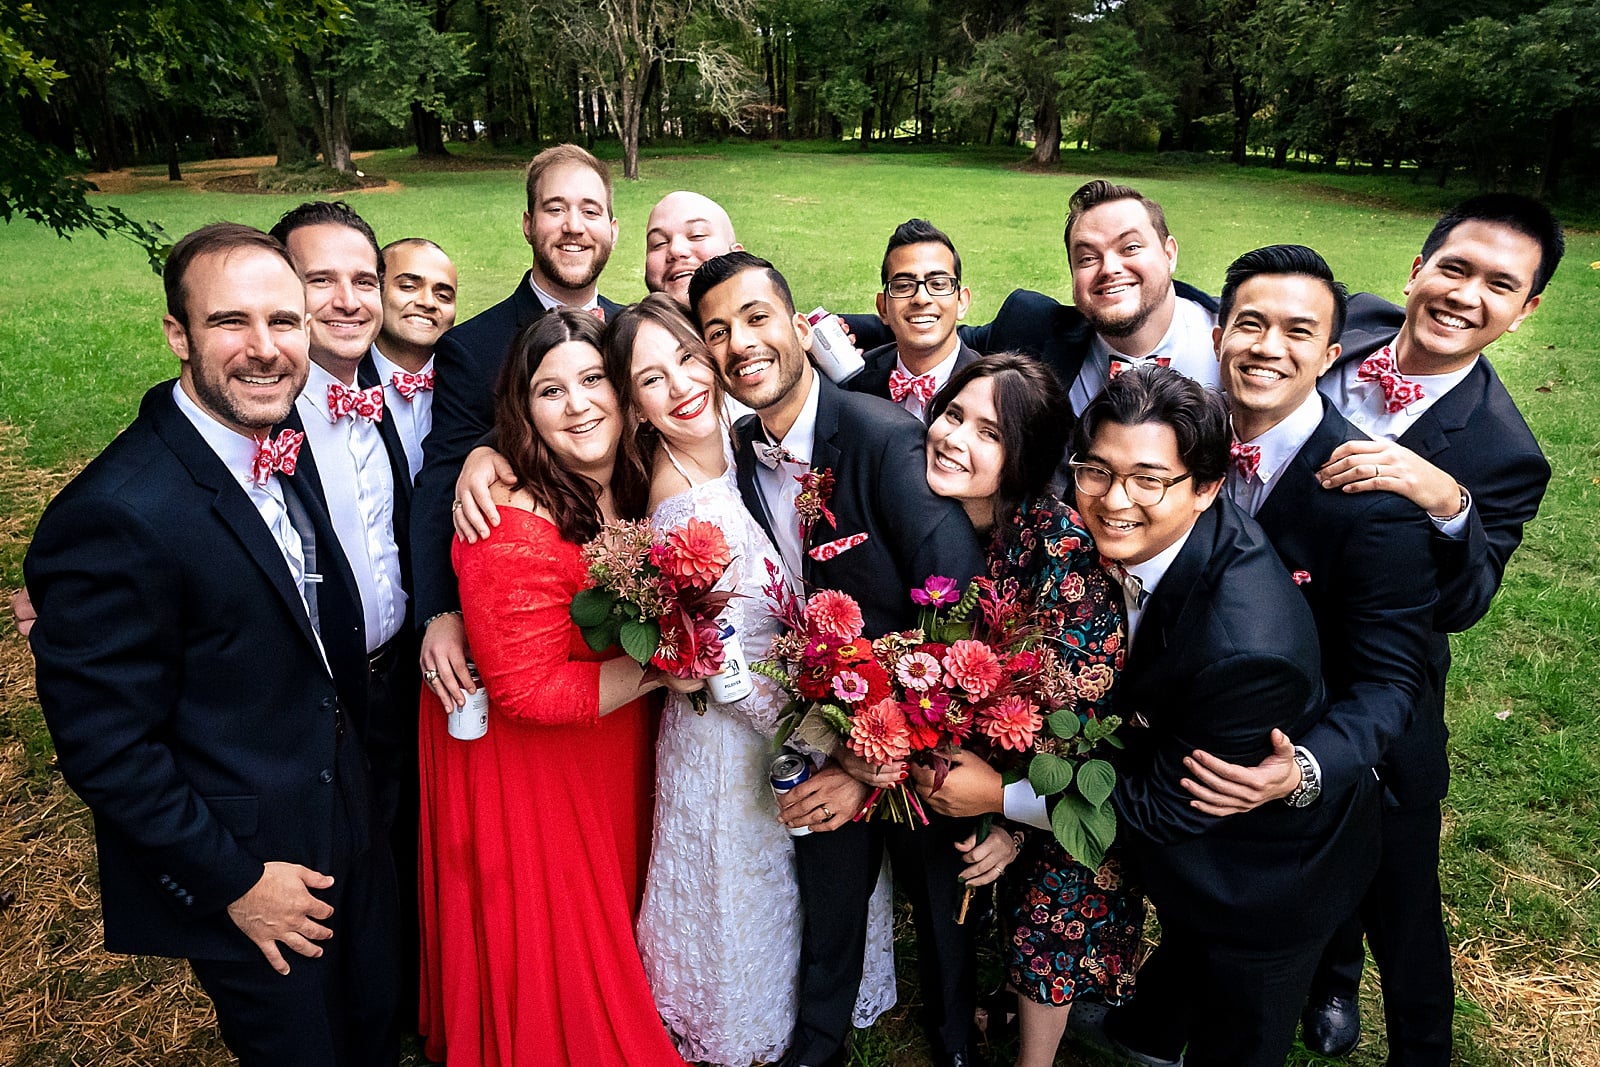 this couple had the most fun people in their wedding party!